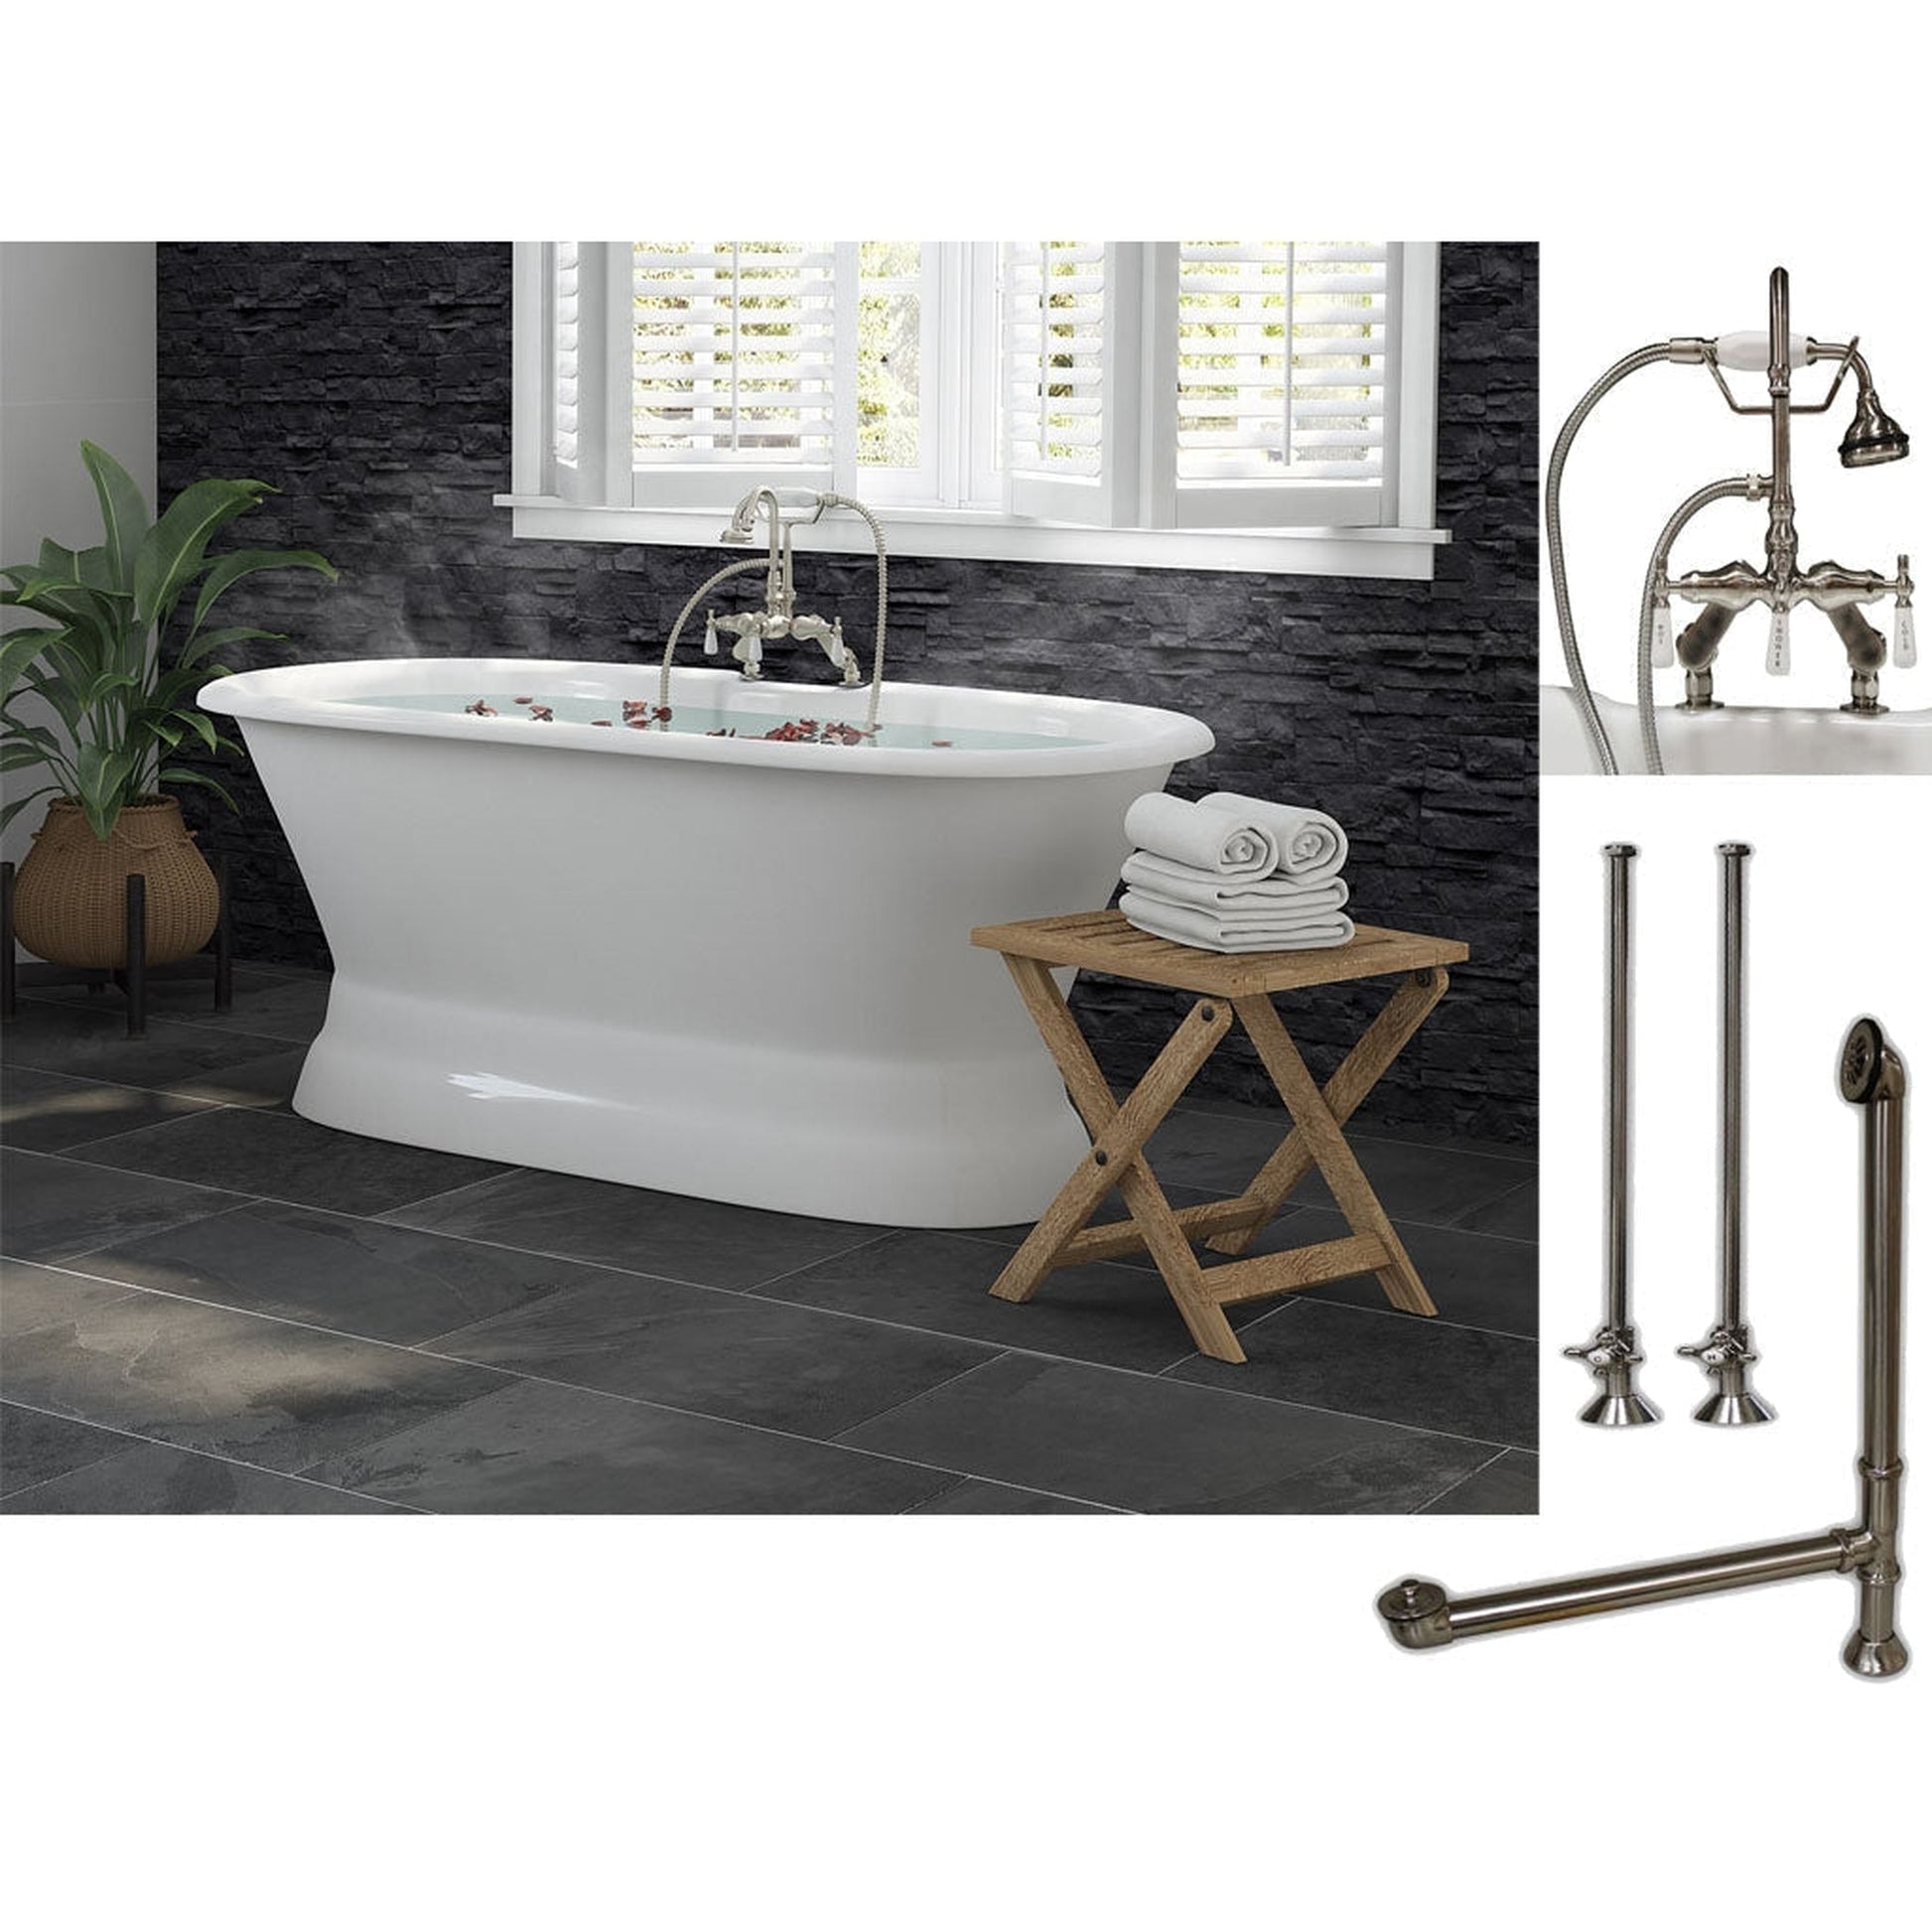 Cambridge Plumbing 60" White Cast Iron Double Ended Pedestal Bathtub With Deck Holes And Complete Plumbing Package Including Porcelain Lever English Telephone Brass Faucet, Supply Lines, Drain And Overflow Assembly In Brushed Nickel